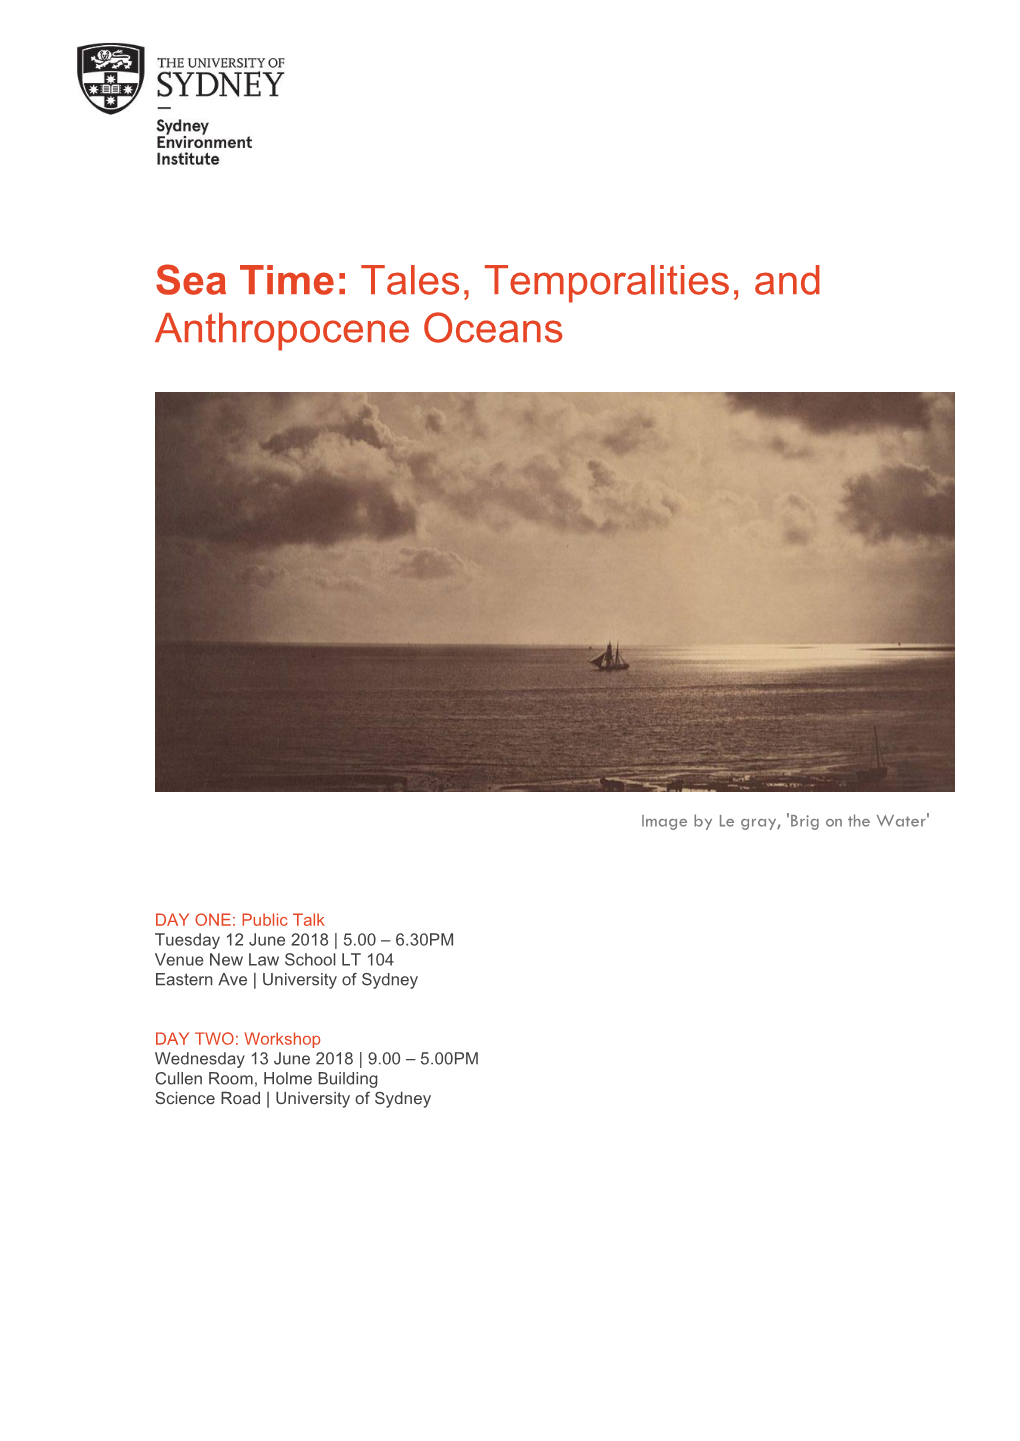 Sea Time: Tales, Temporalities, And